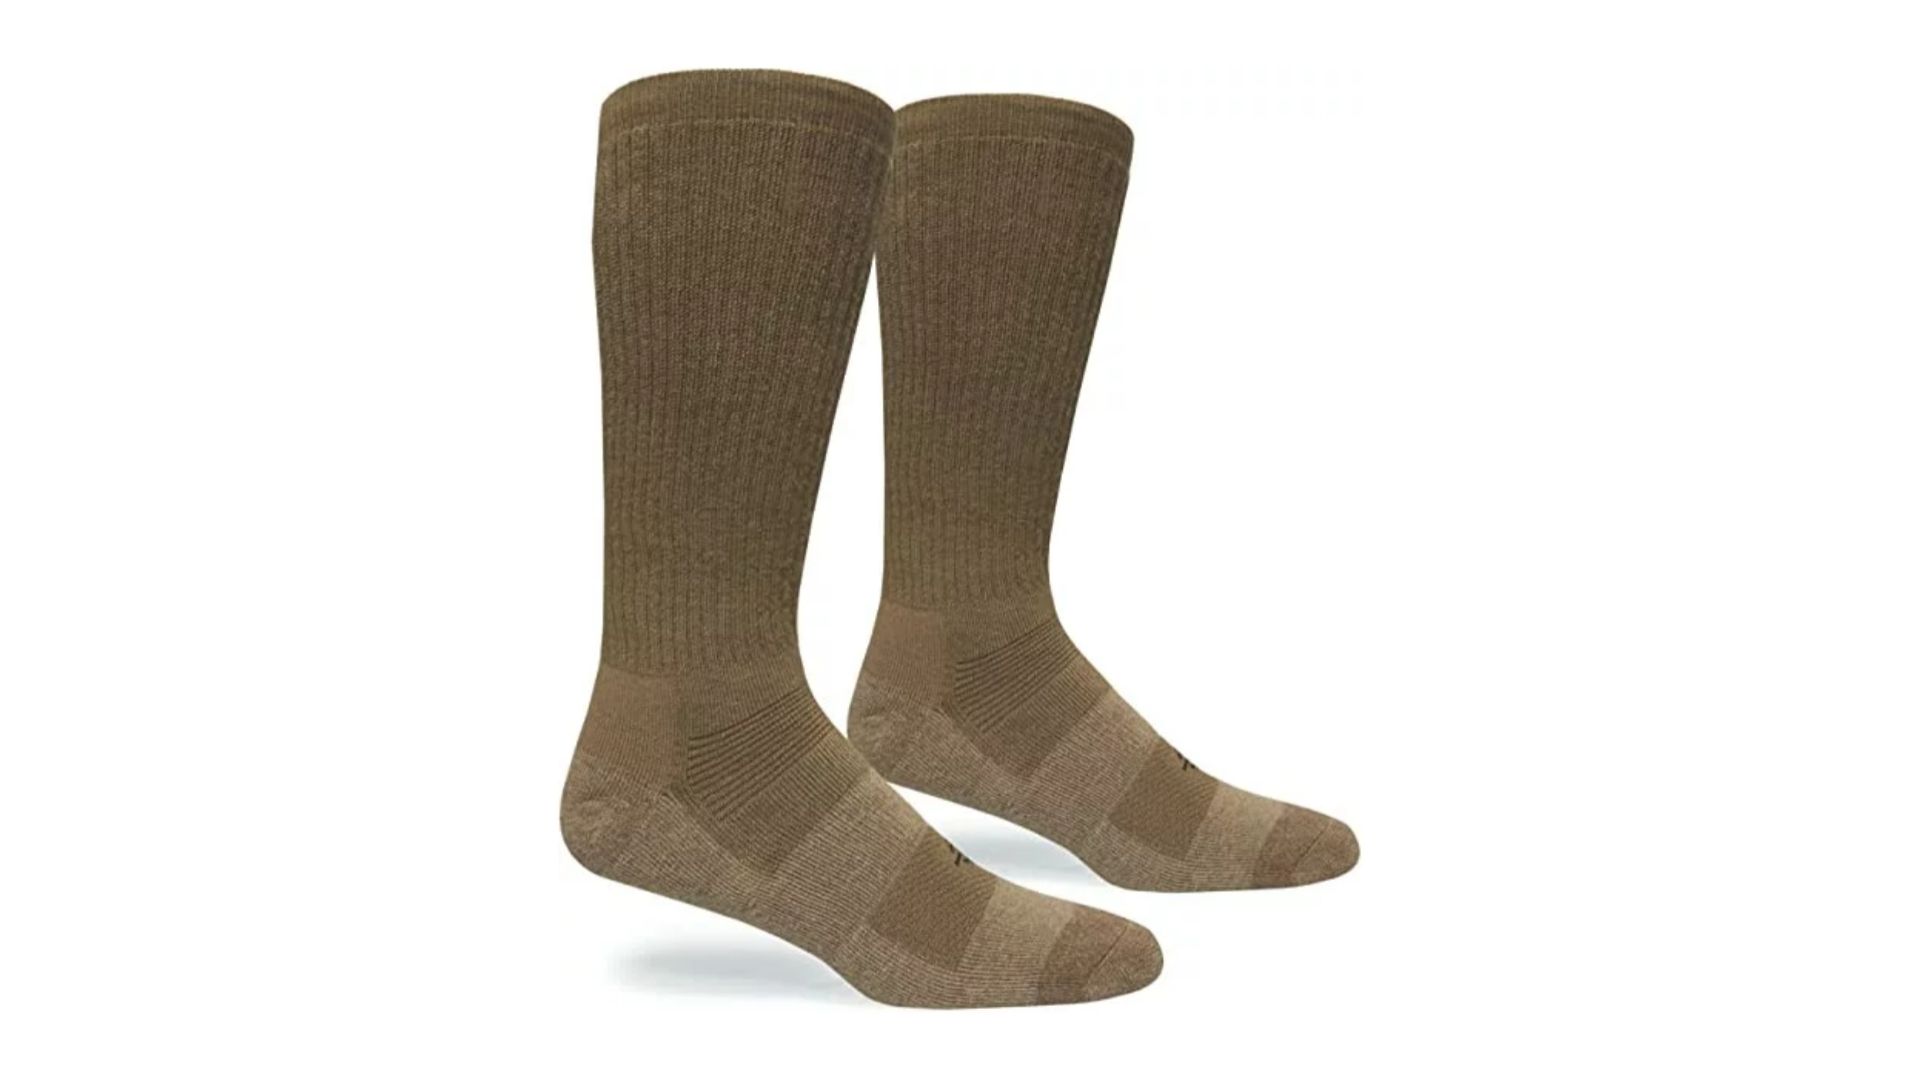 Best Socks for Military Boots & Combat Boots – Darn Tough